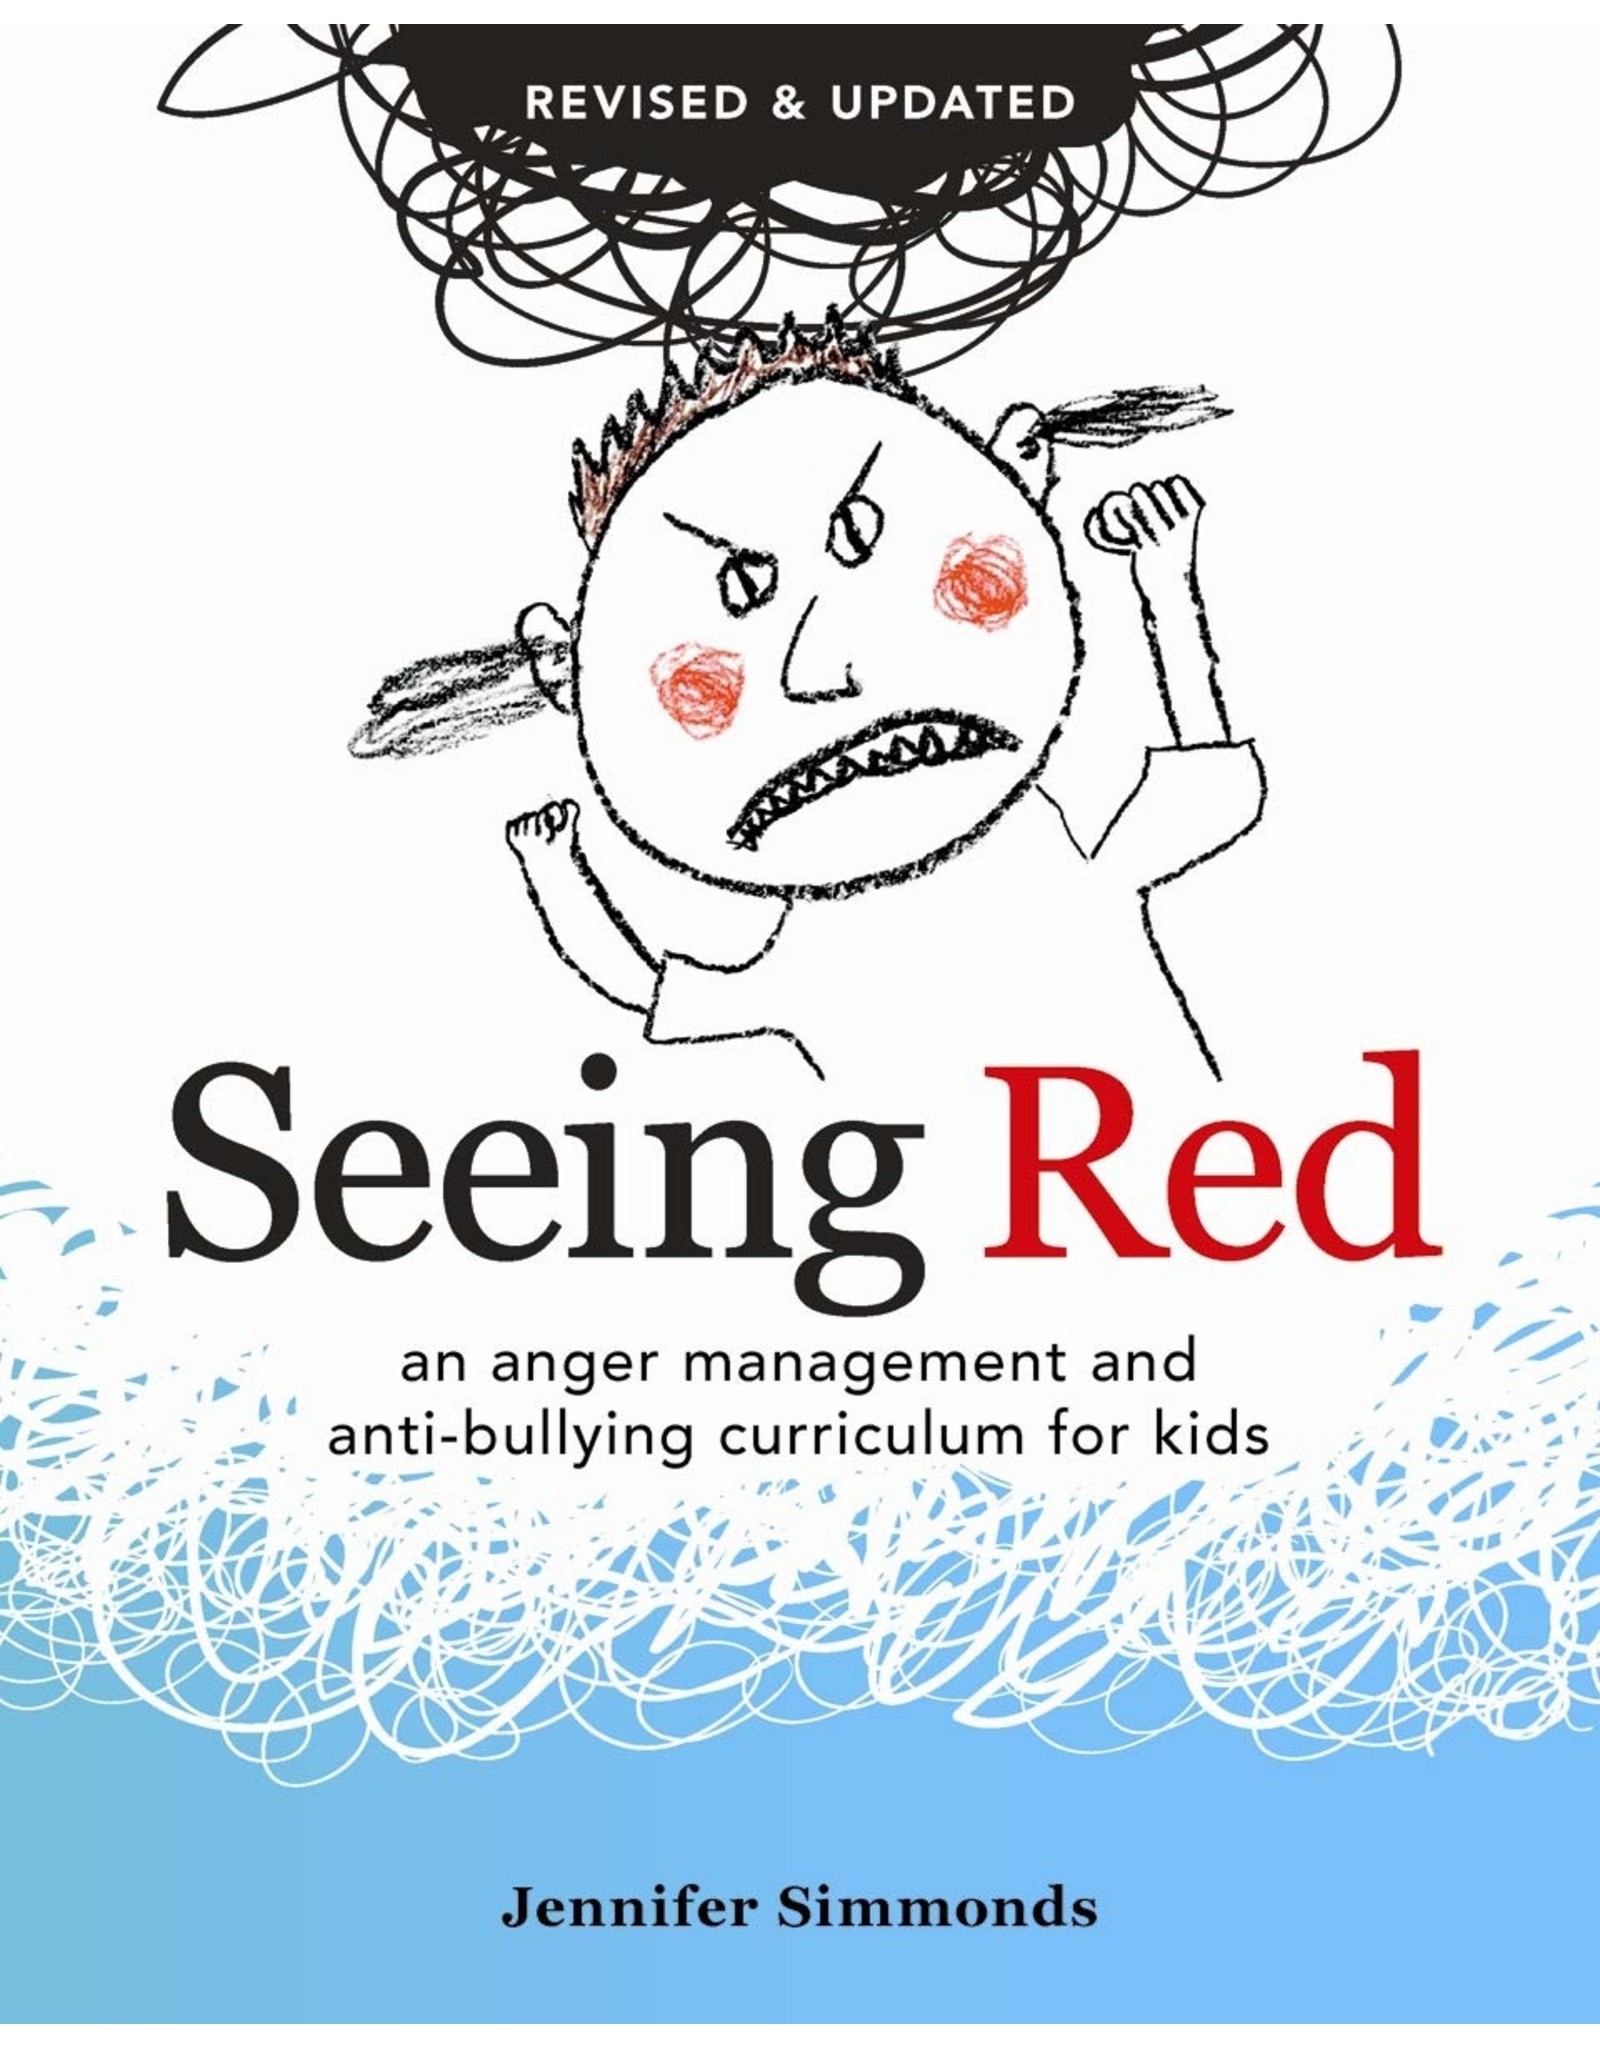 Literature Seeing Red: An Anger Management and Anti-bullying Curriculum for Kids